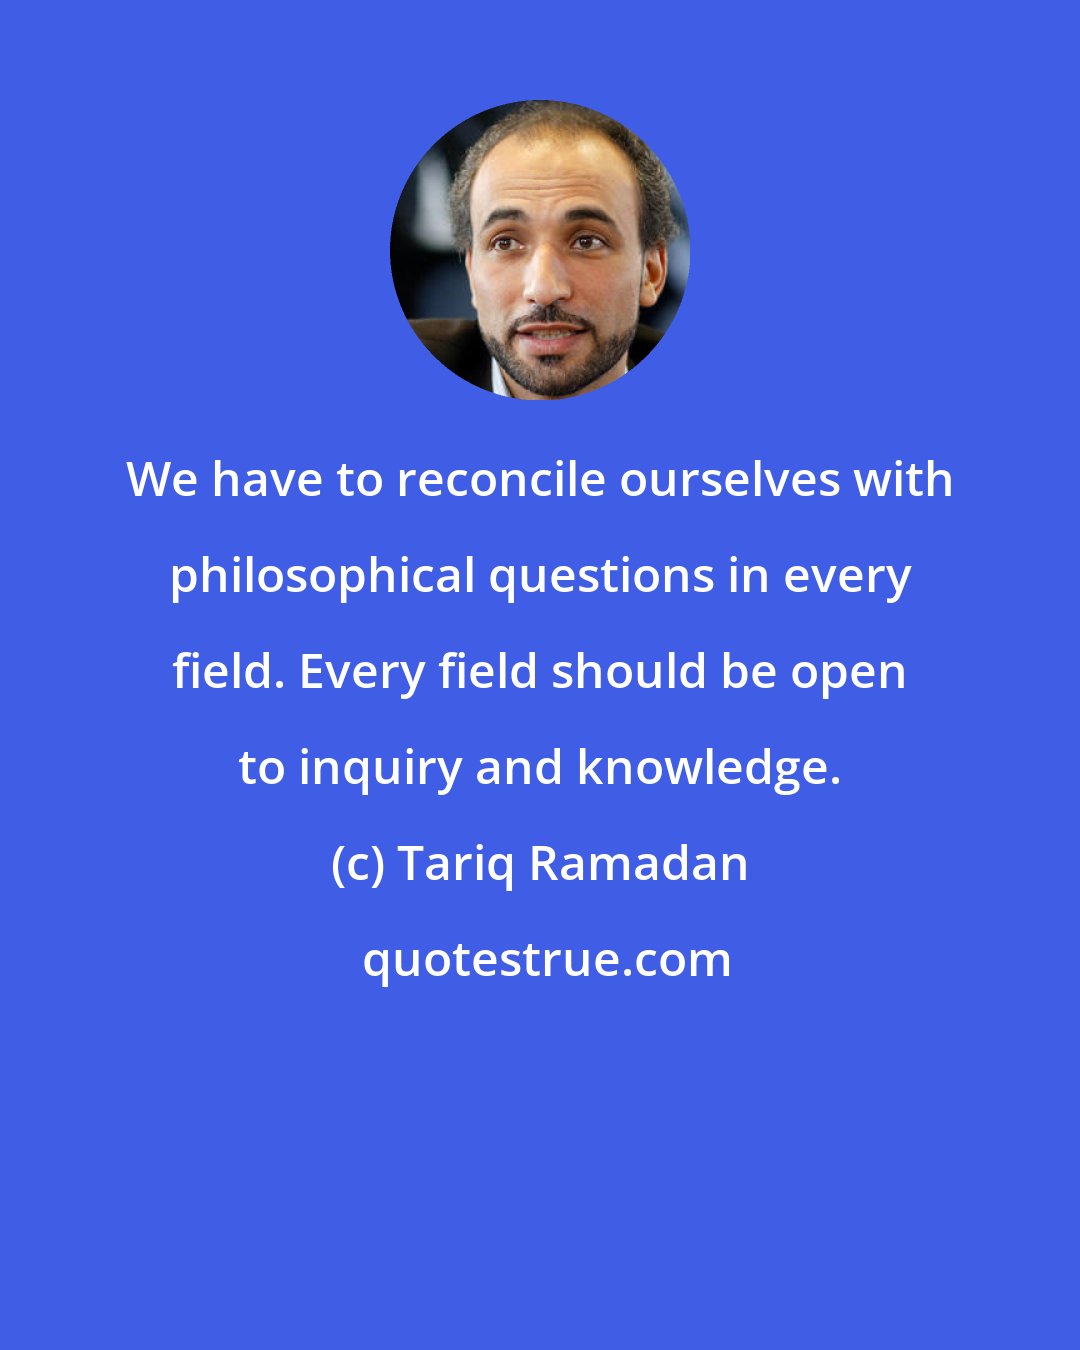 Tariq Ramadan: We have to reconcile ourselves with philosophical questions in every field. Every field should be open to inquiry and knowledge.